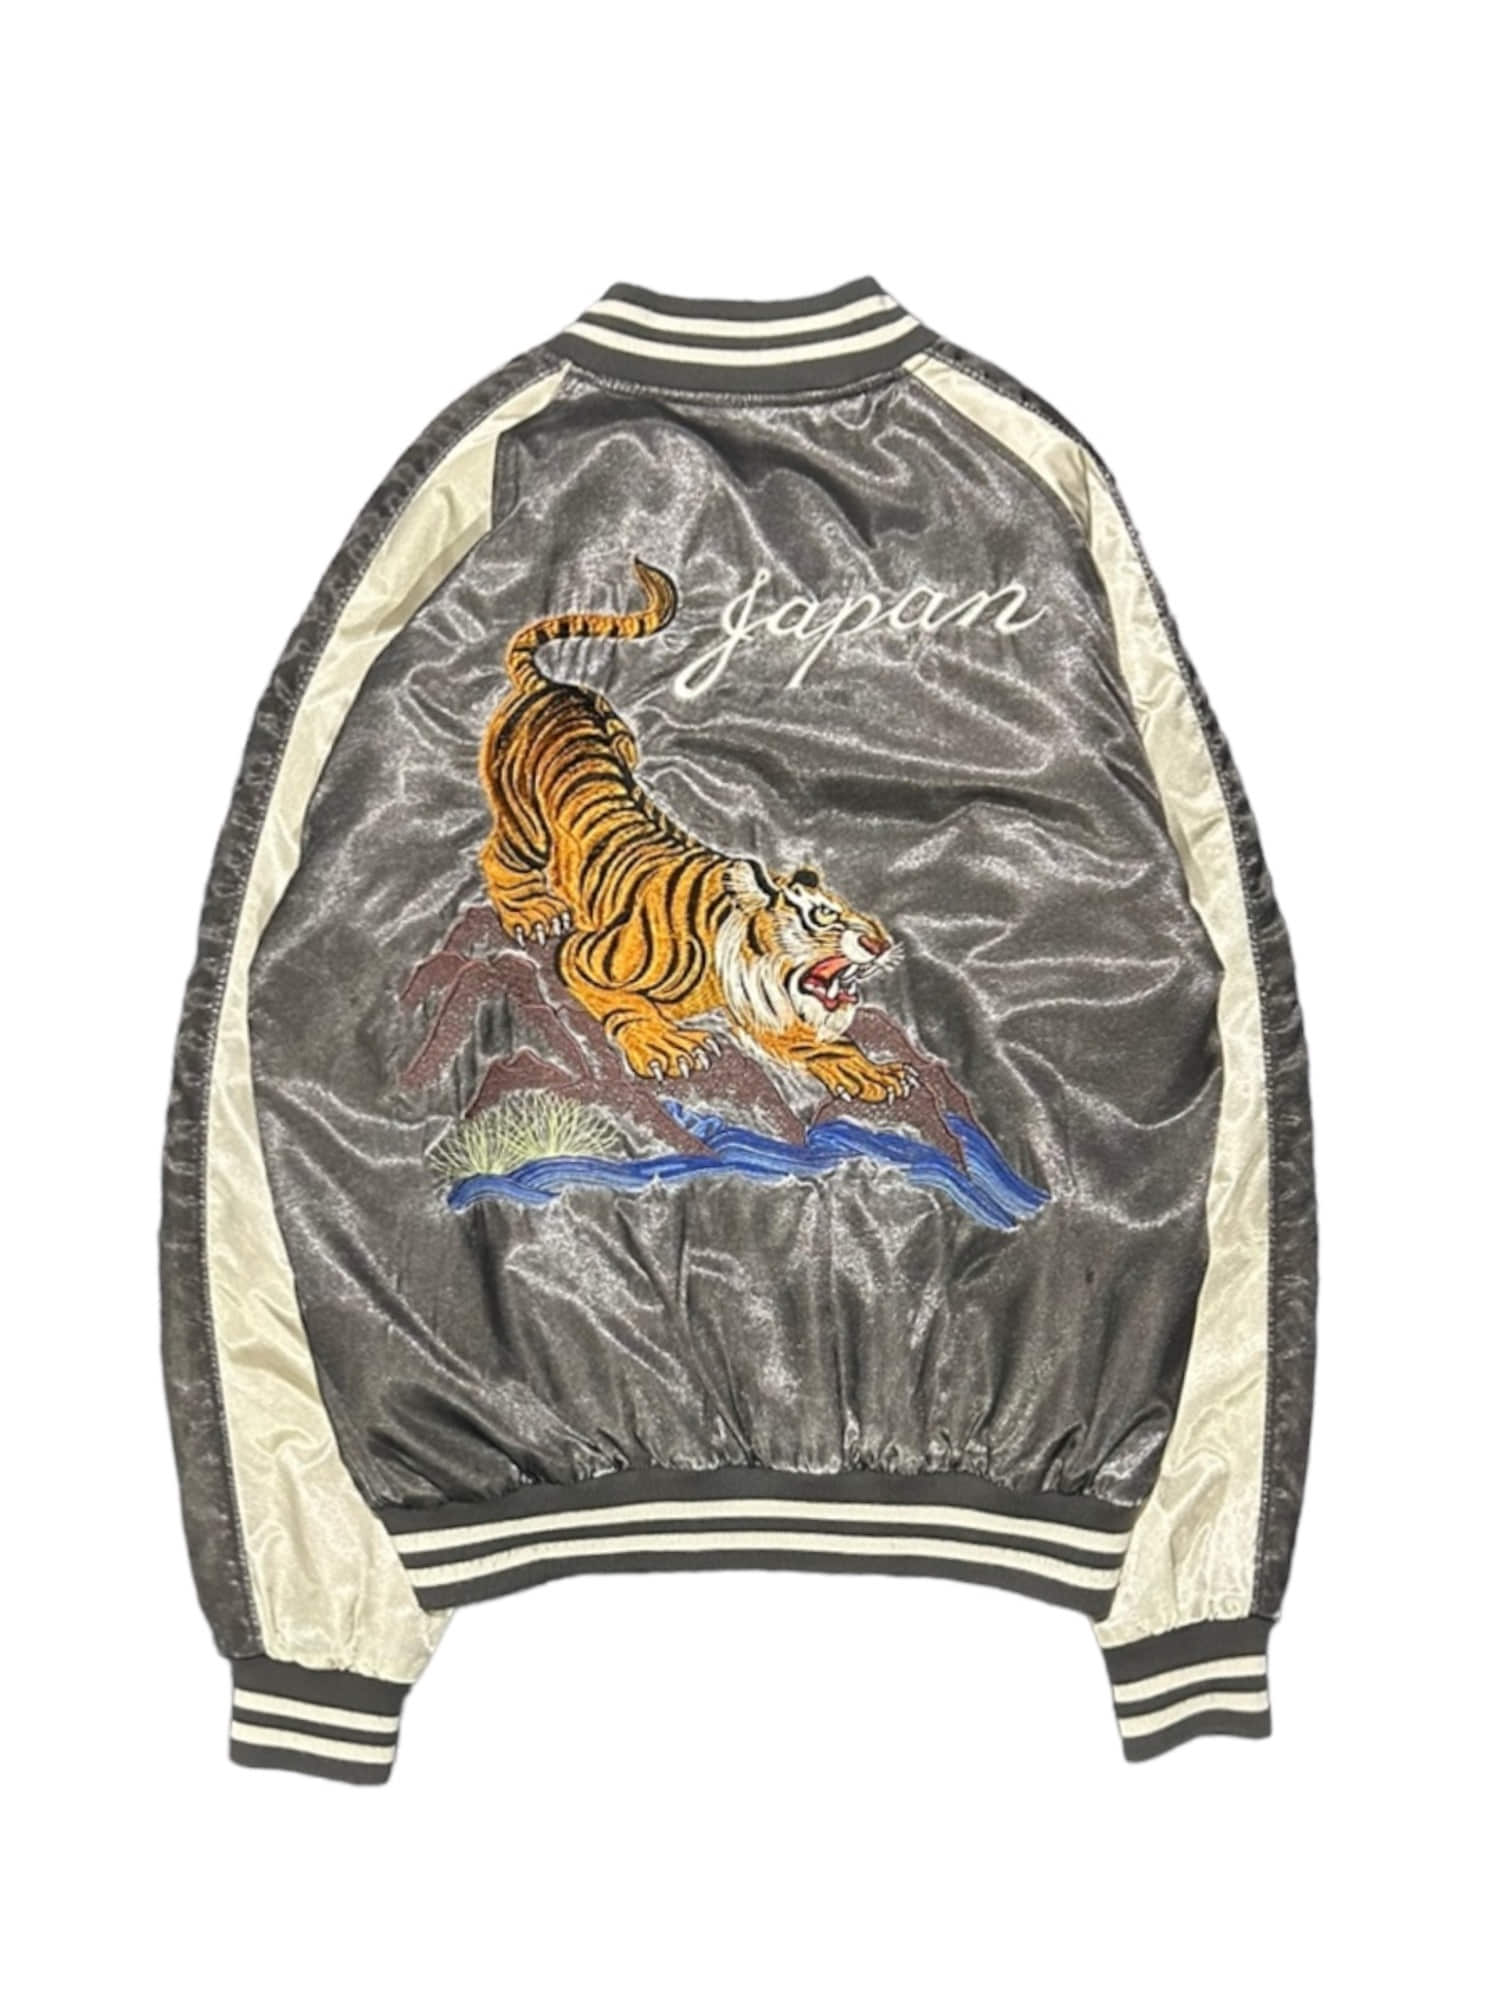 Hoshihime Gold Tiger Embroidery Sukajan LL